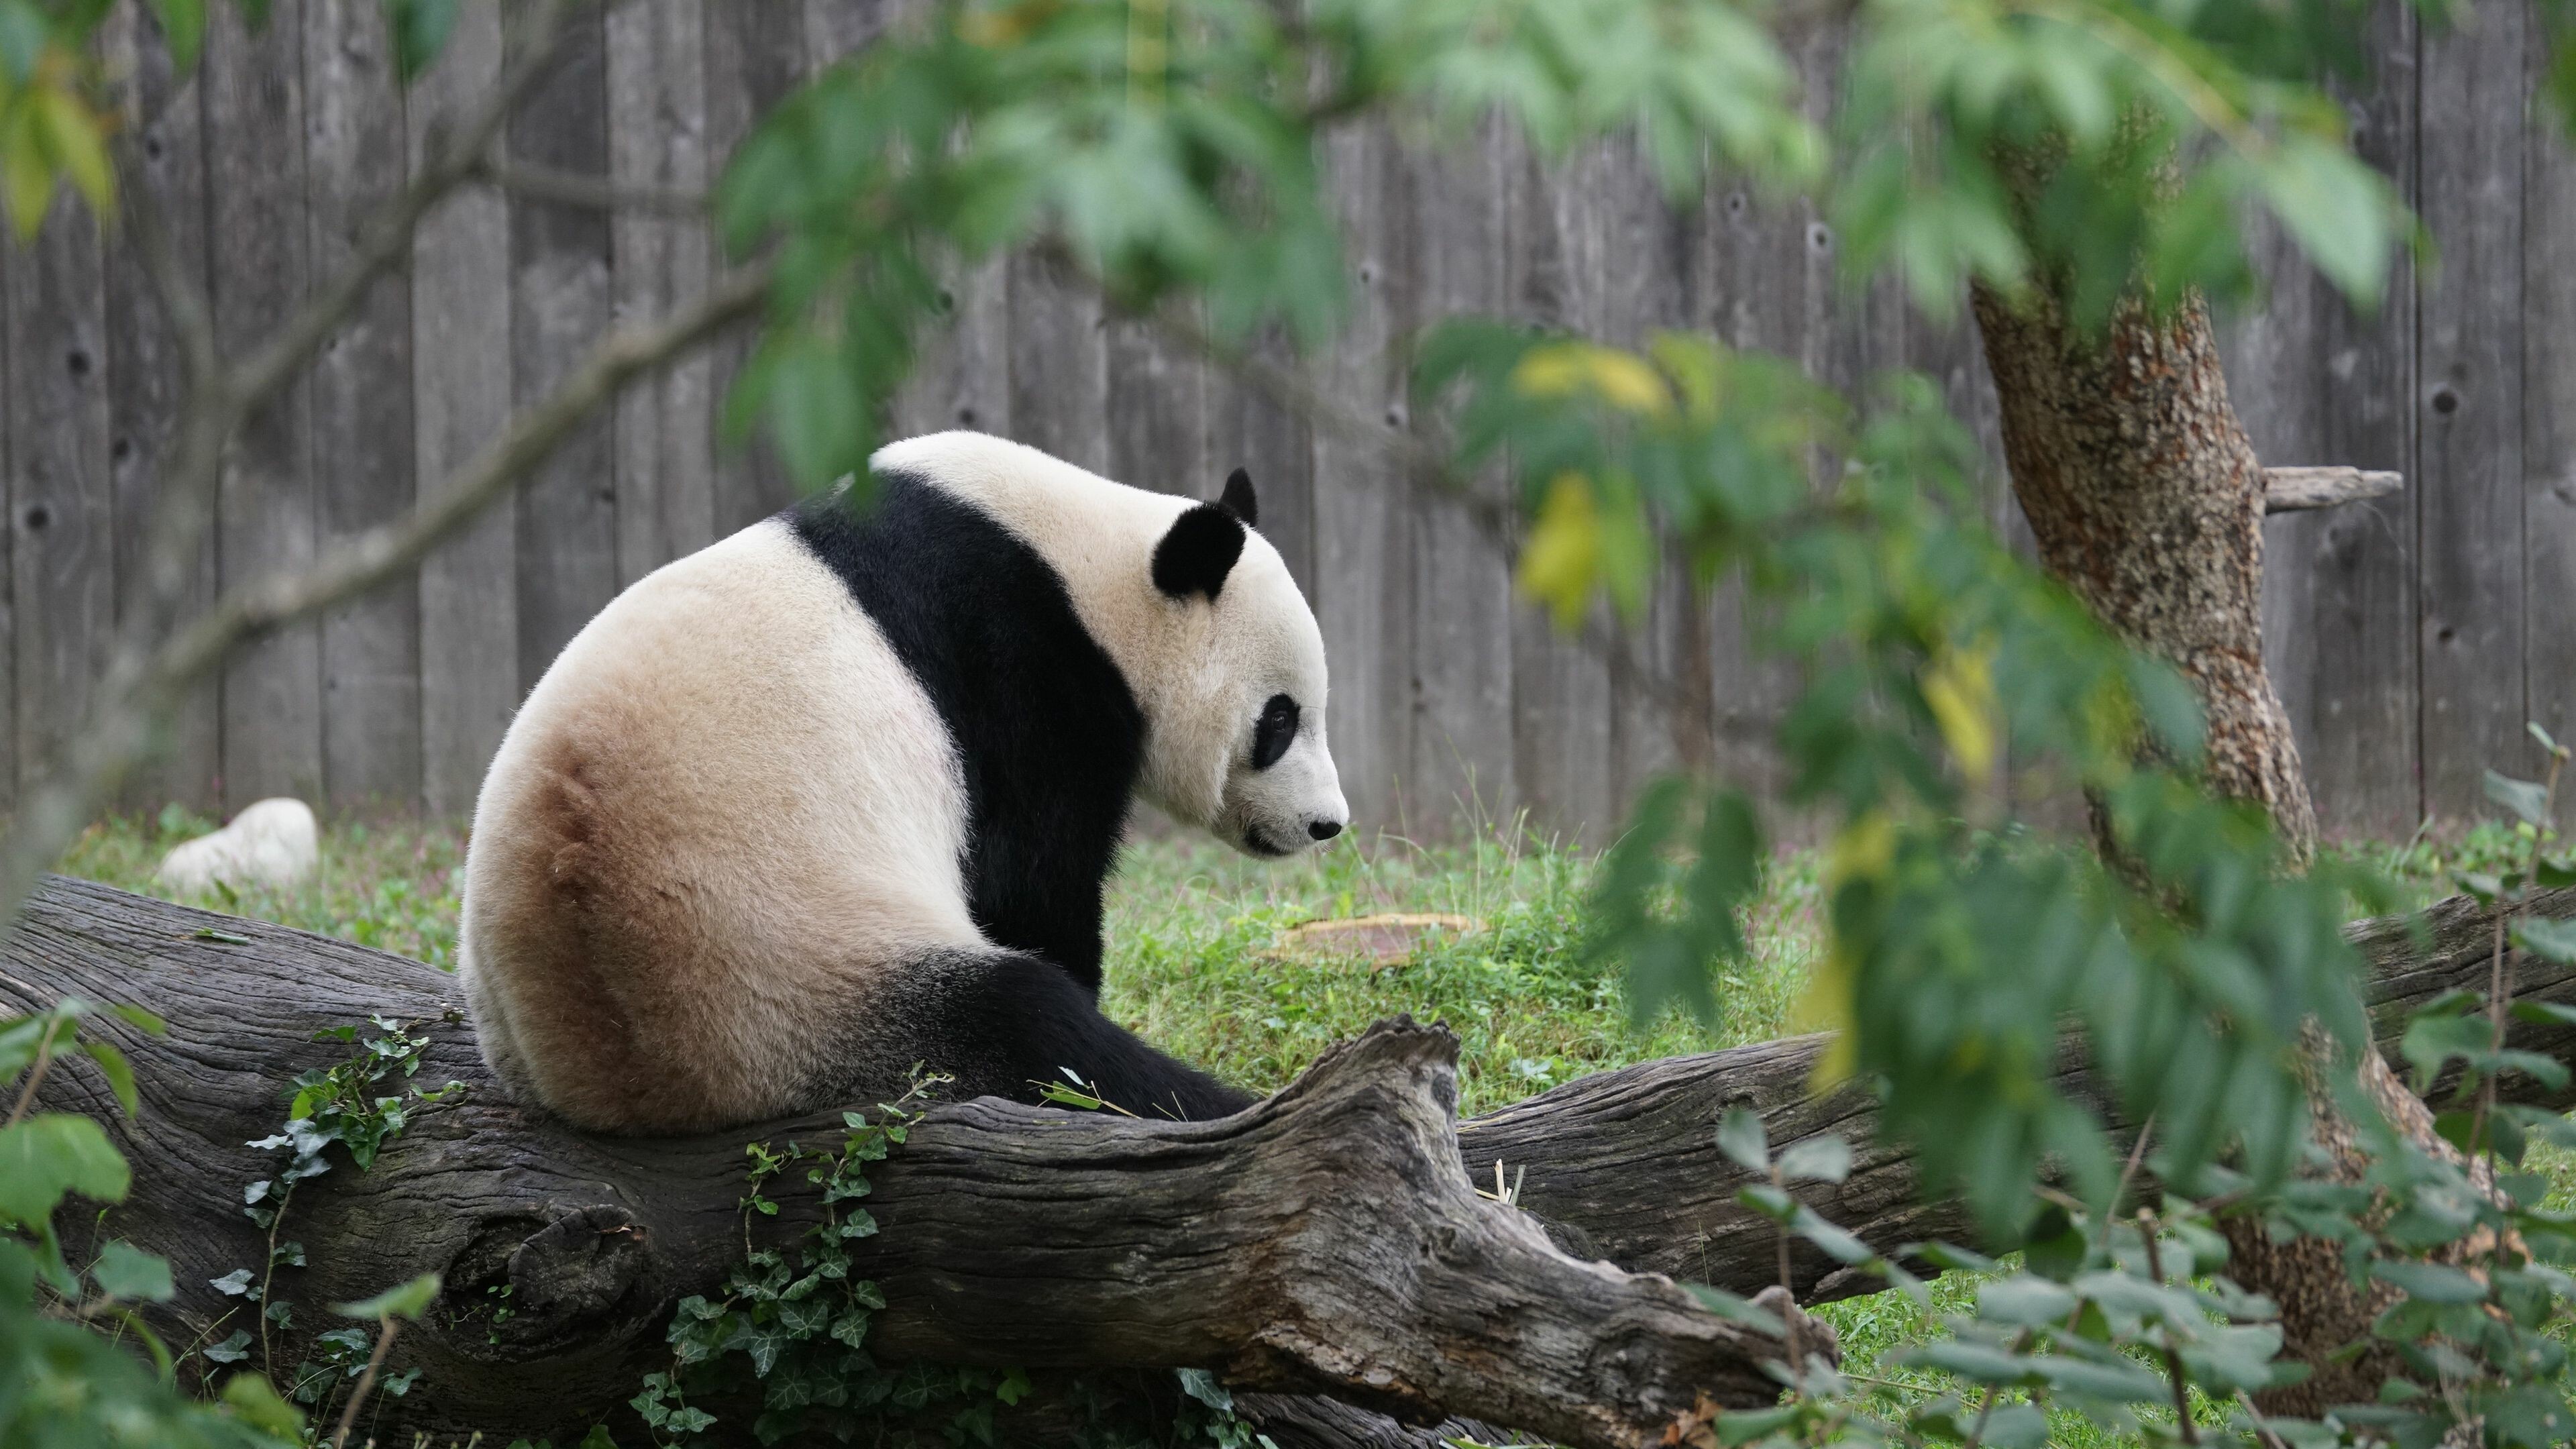 Panda: It is characterized by its bold black-and-white coat and rotund body. 3840x2160 4K Wallpaper.